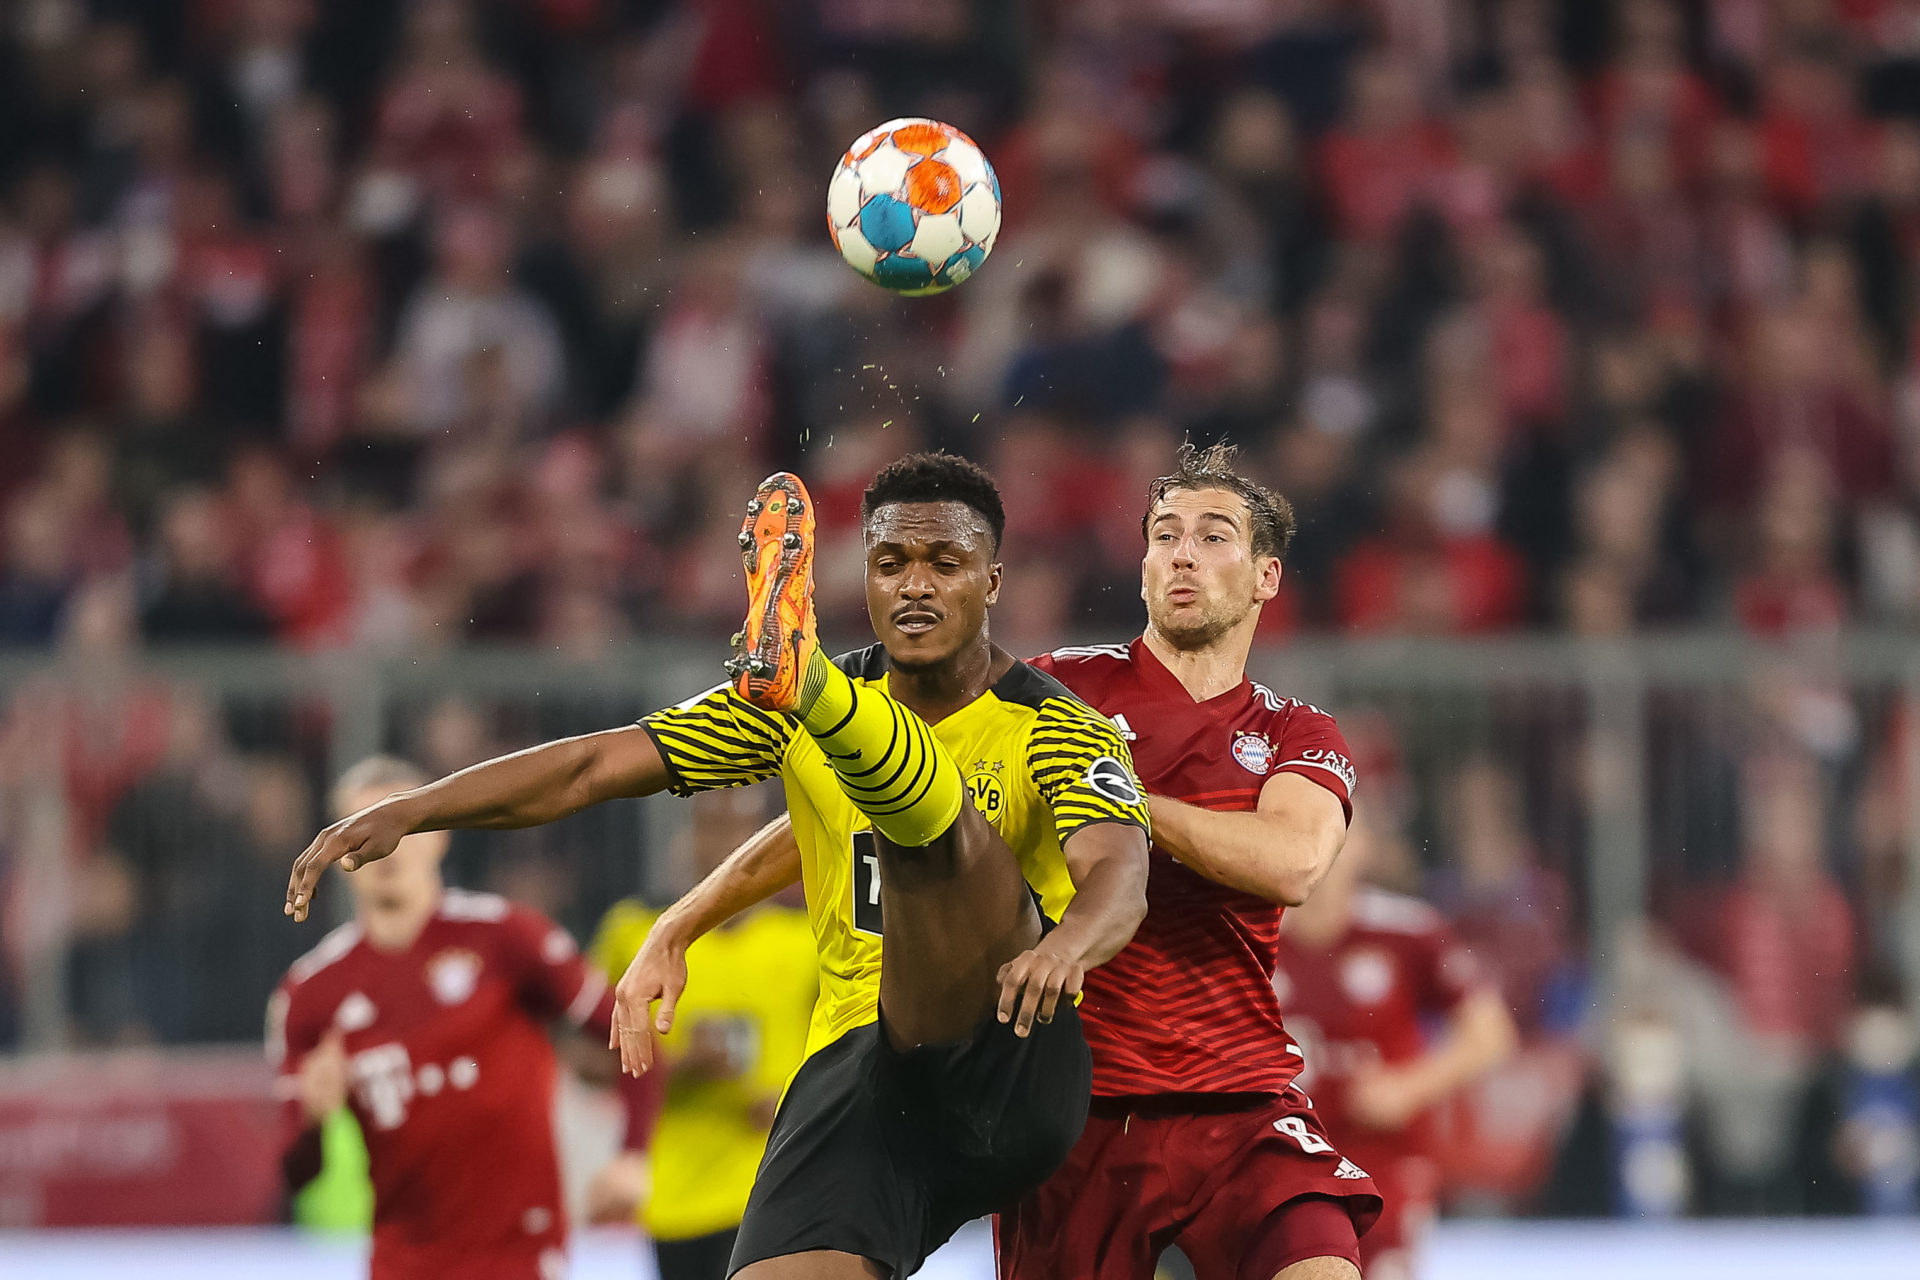 West Ham have reportedly offer a four-year deal to Dan-Axel Zagadou